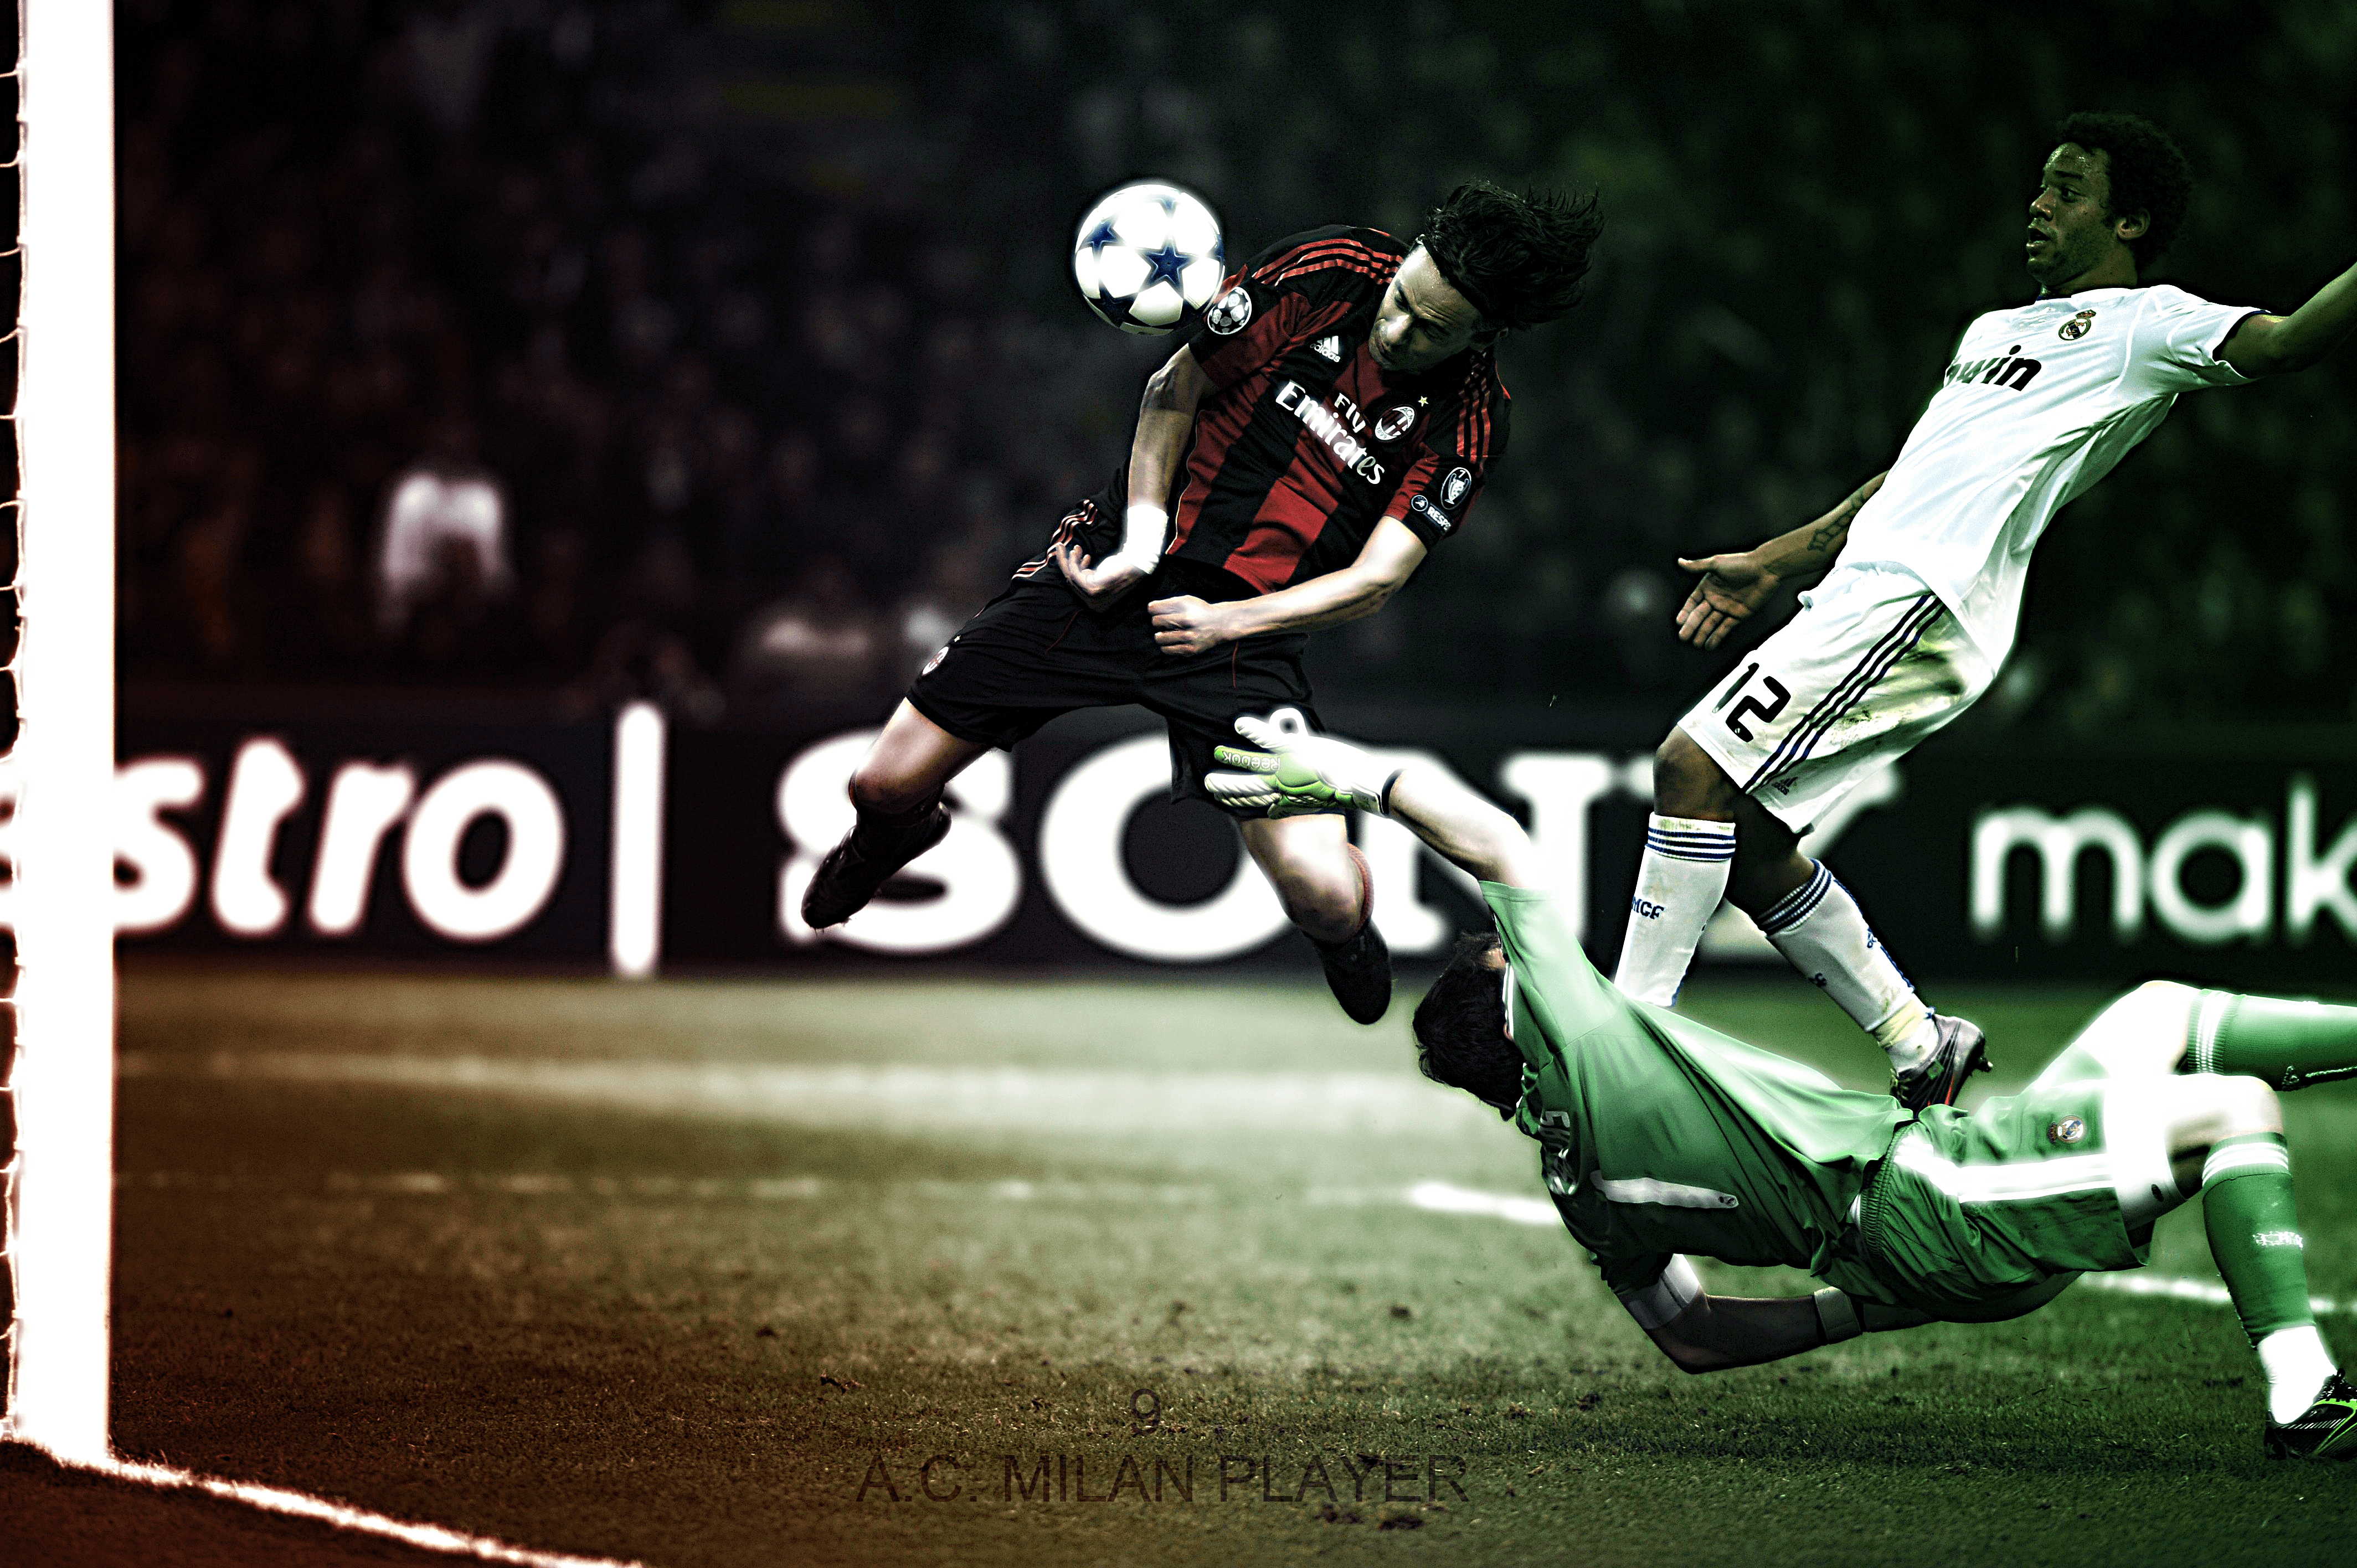 Pippo Inzaghi Wallpaper